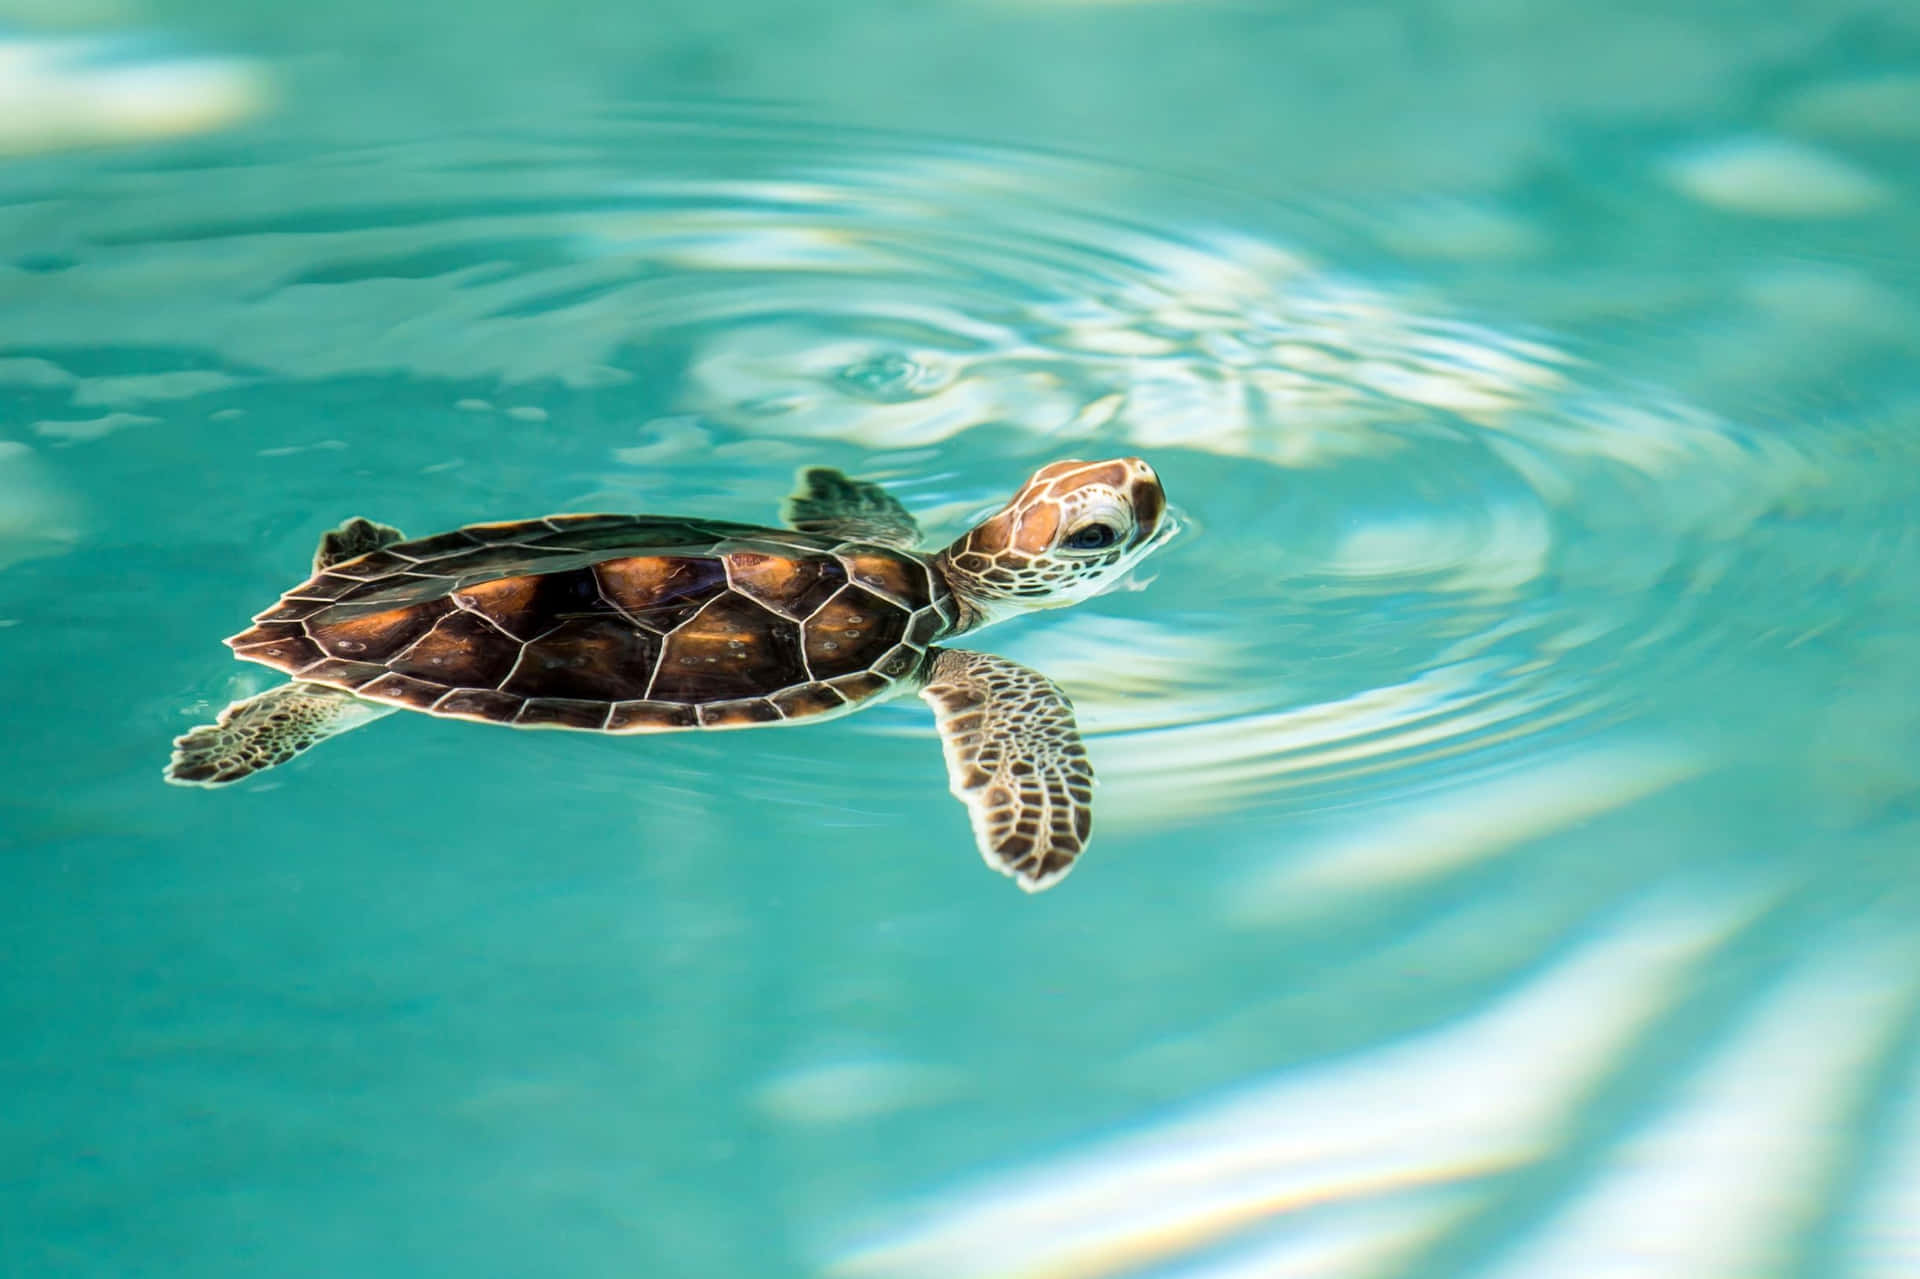 A Baby Turtle Swimming In The Water